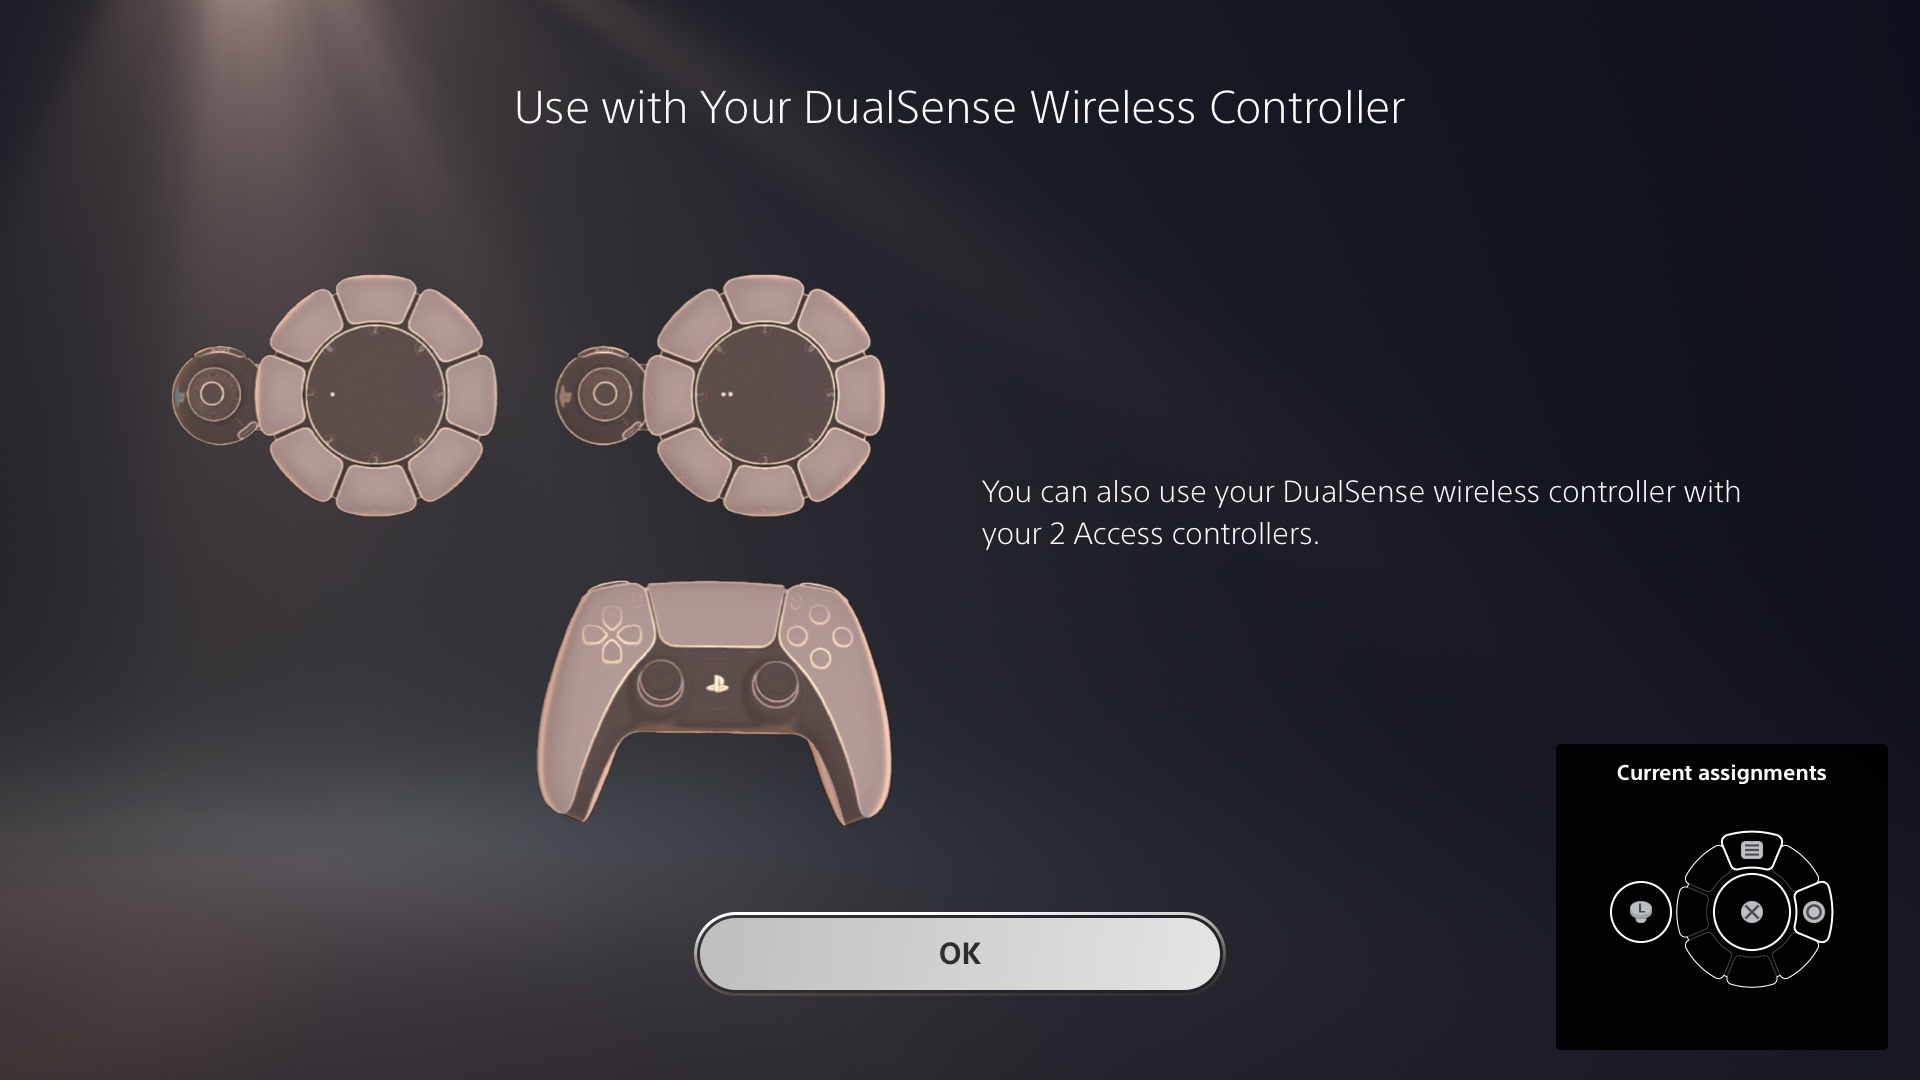 A PlayStation 5 screen showing 2 access controllers and a DualSense controller can be used together.